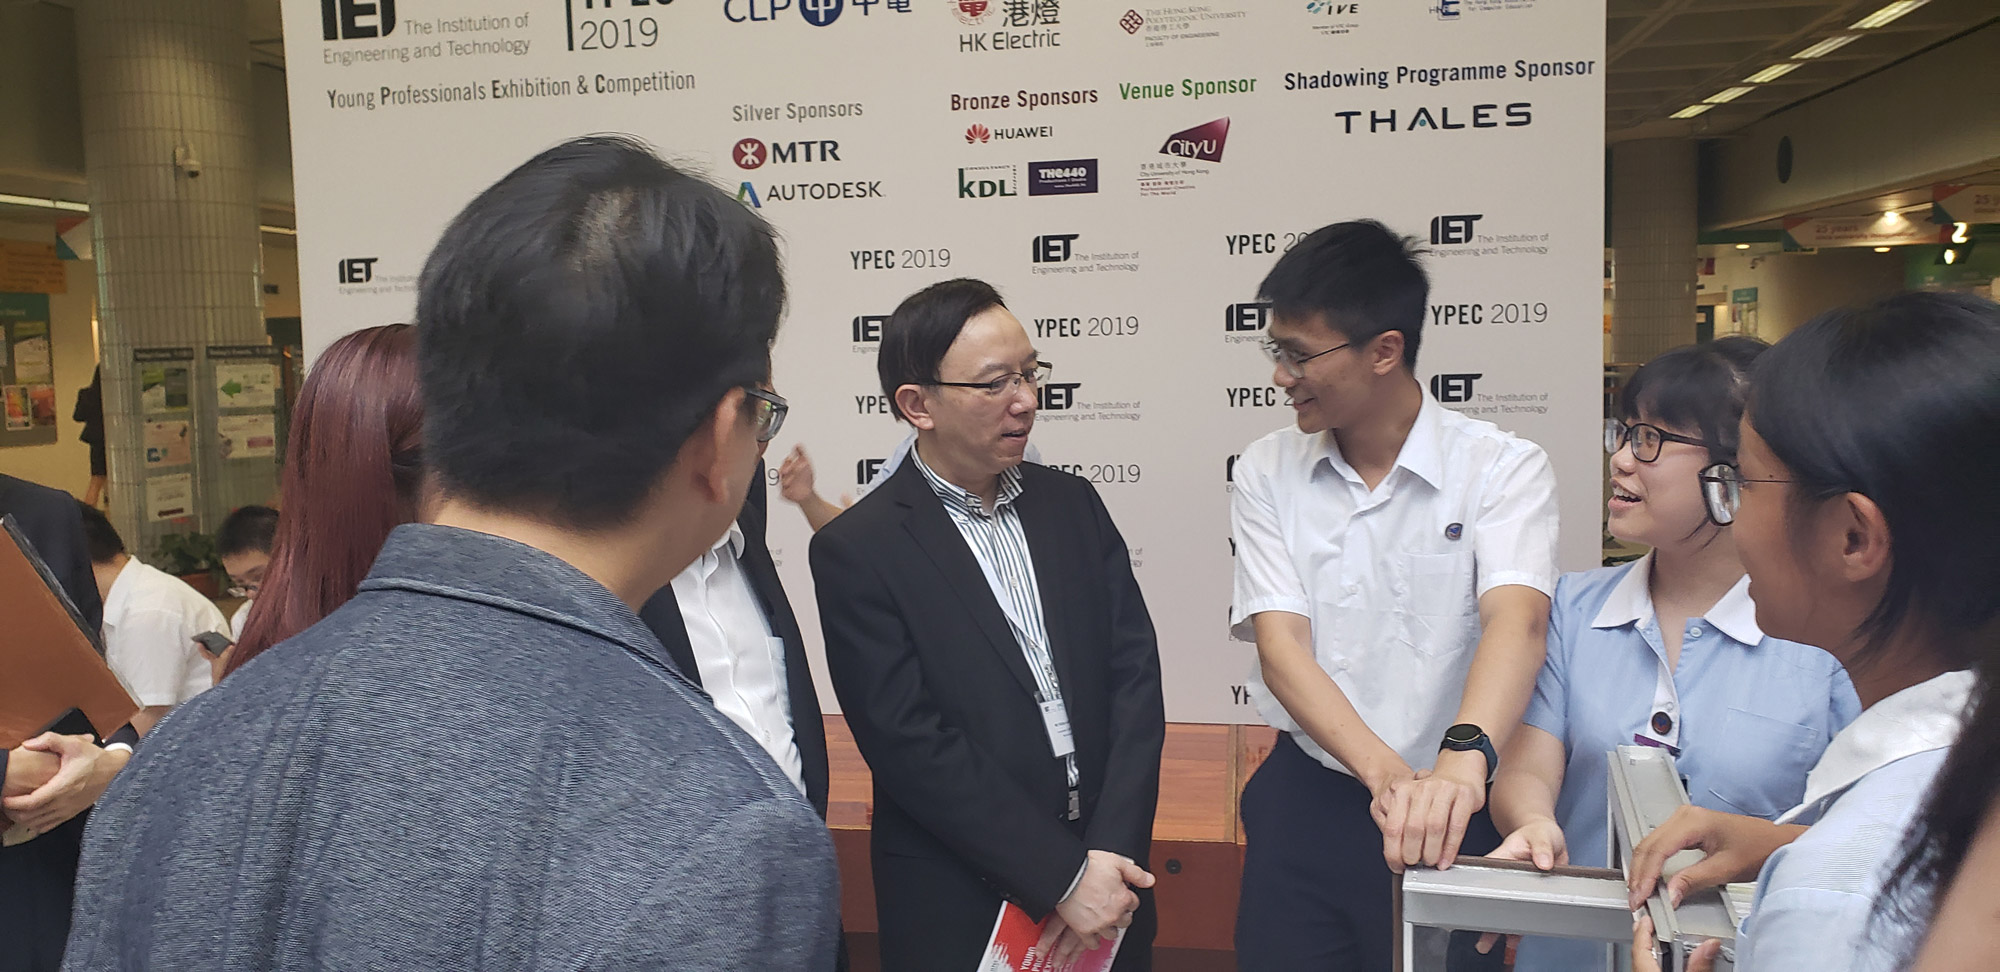 Mr. Victor Lam, Government Chief Information Officer, at the exhibition booths of the "Young Professionals Exhibition & Competition (YPEC) 2019”.